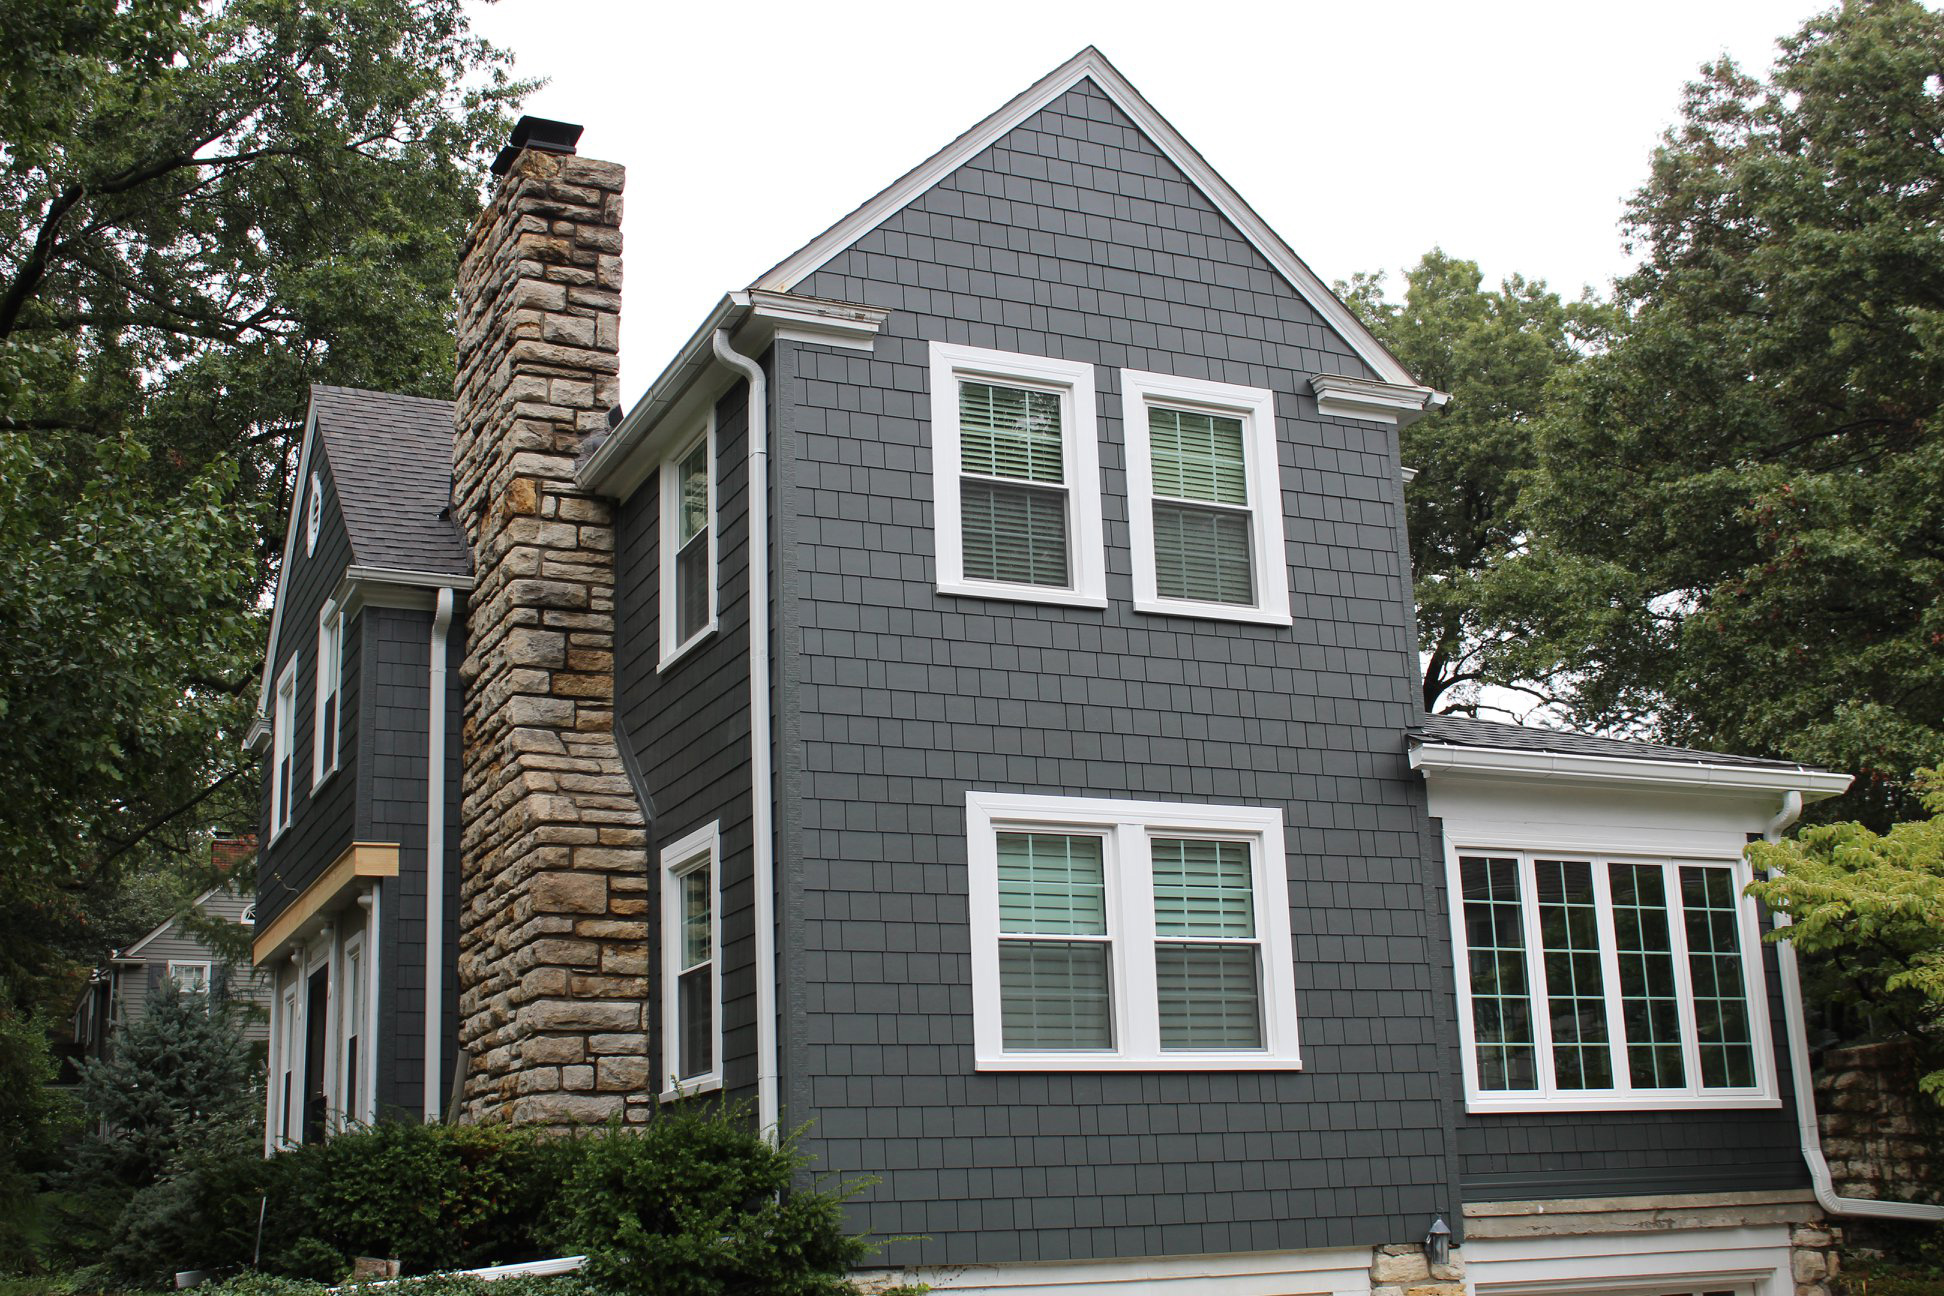 HardieShingle siding installed on a home in Fairway, KS by Smart Exteriors